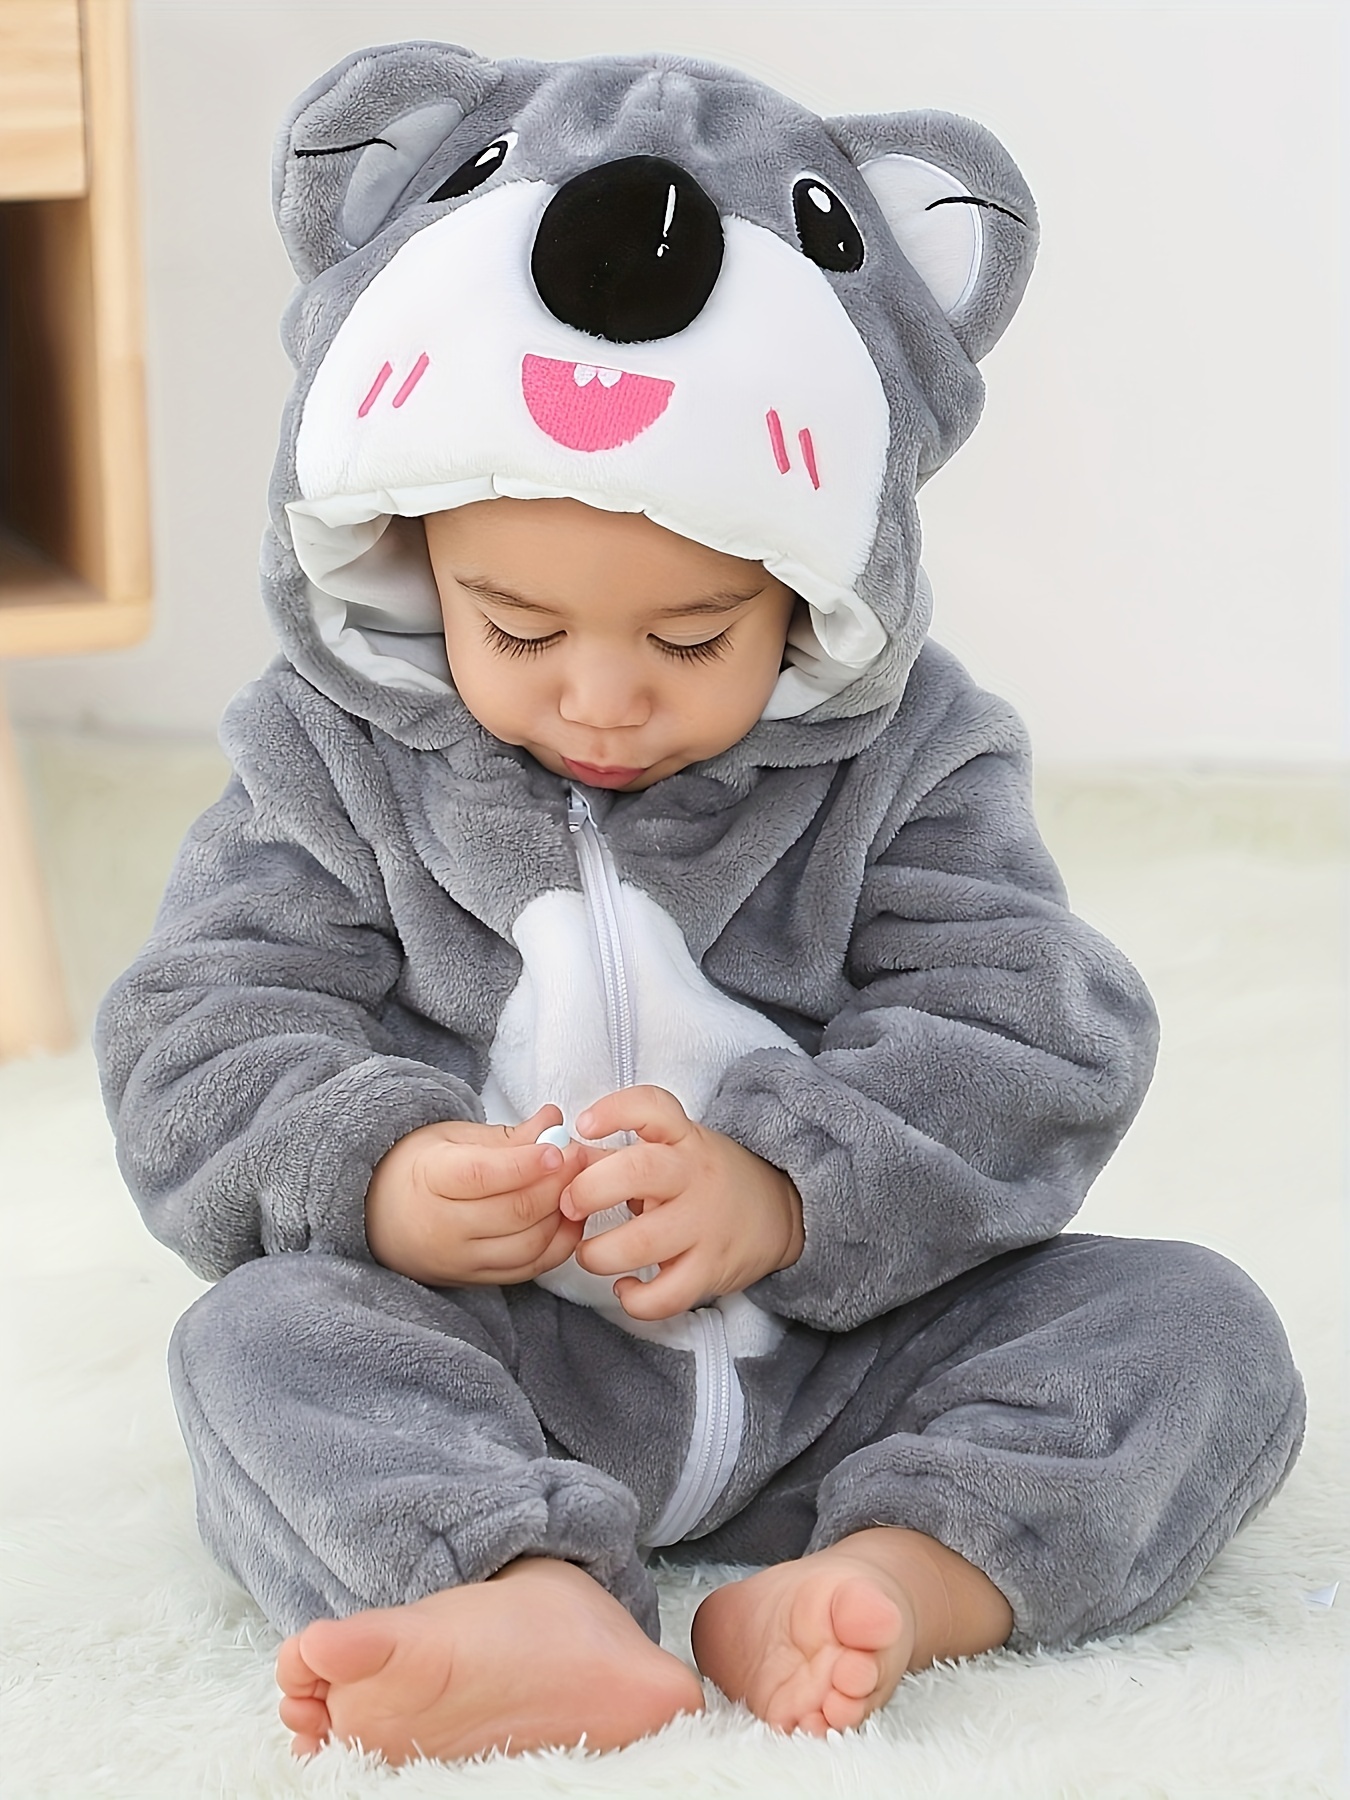 Stitch Penguin Dog Cosplay Costume for Children Clothing Sets Hooded  Halloween Party Onesies Pajama Kids Boy Girl Long Sleeve - AliExpress